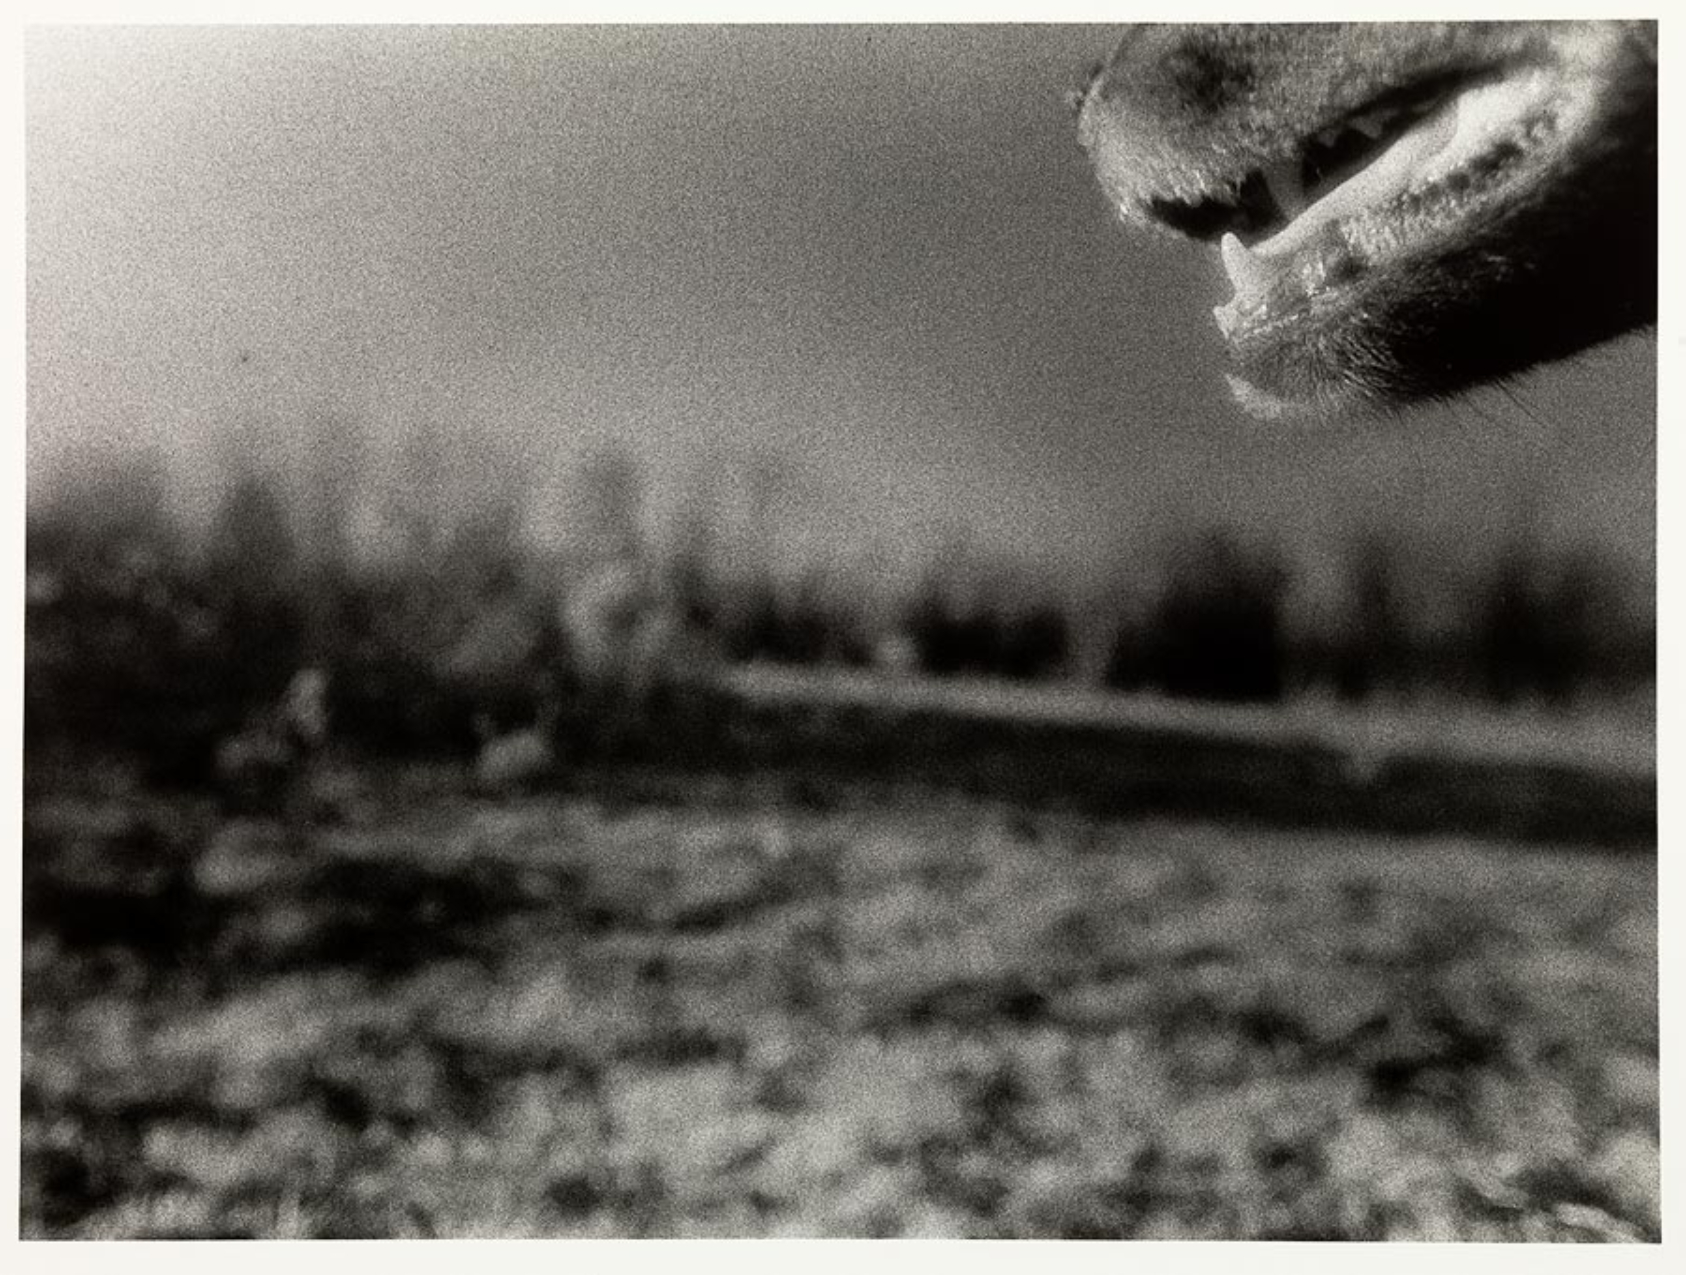 blurry landscape of low growth with trees in background, partial muzzle of a panting dog visible at upper right corner